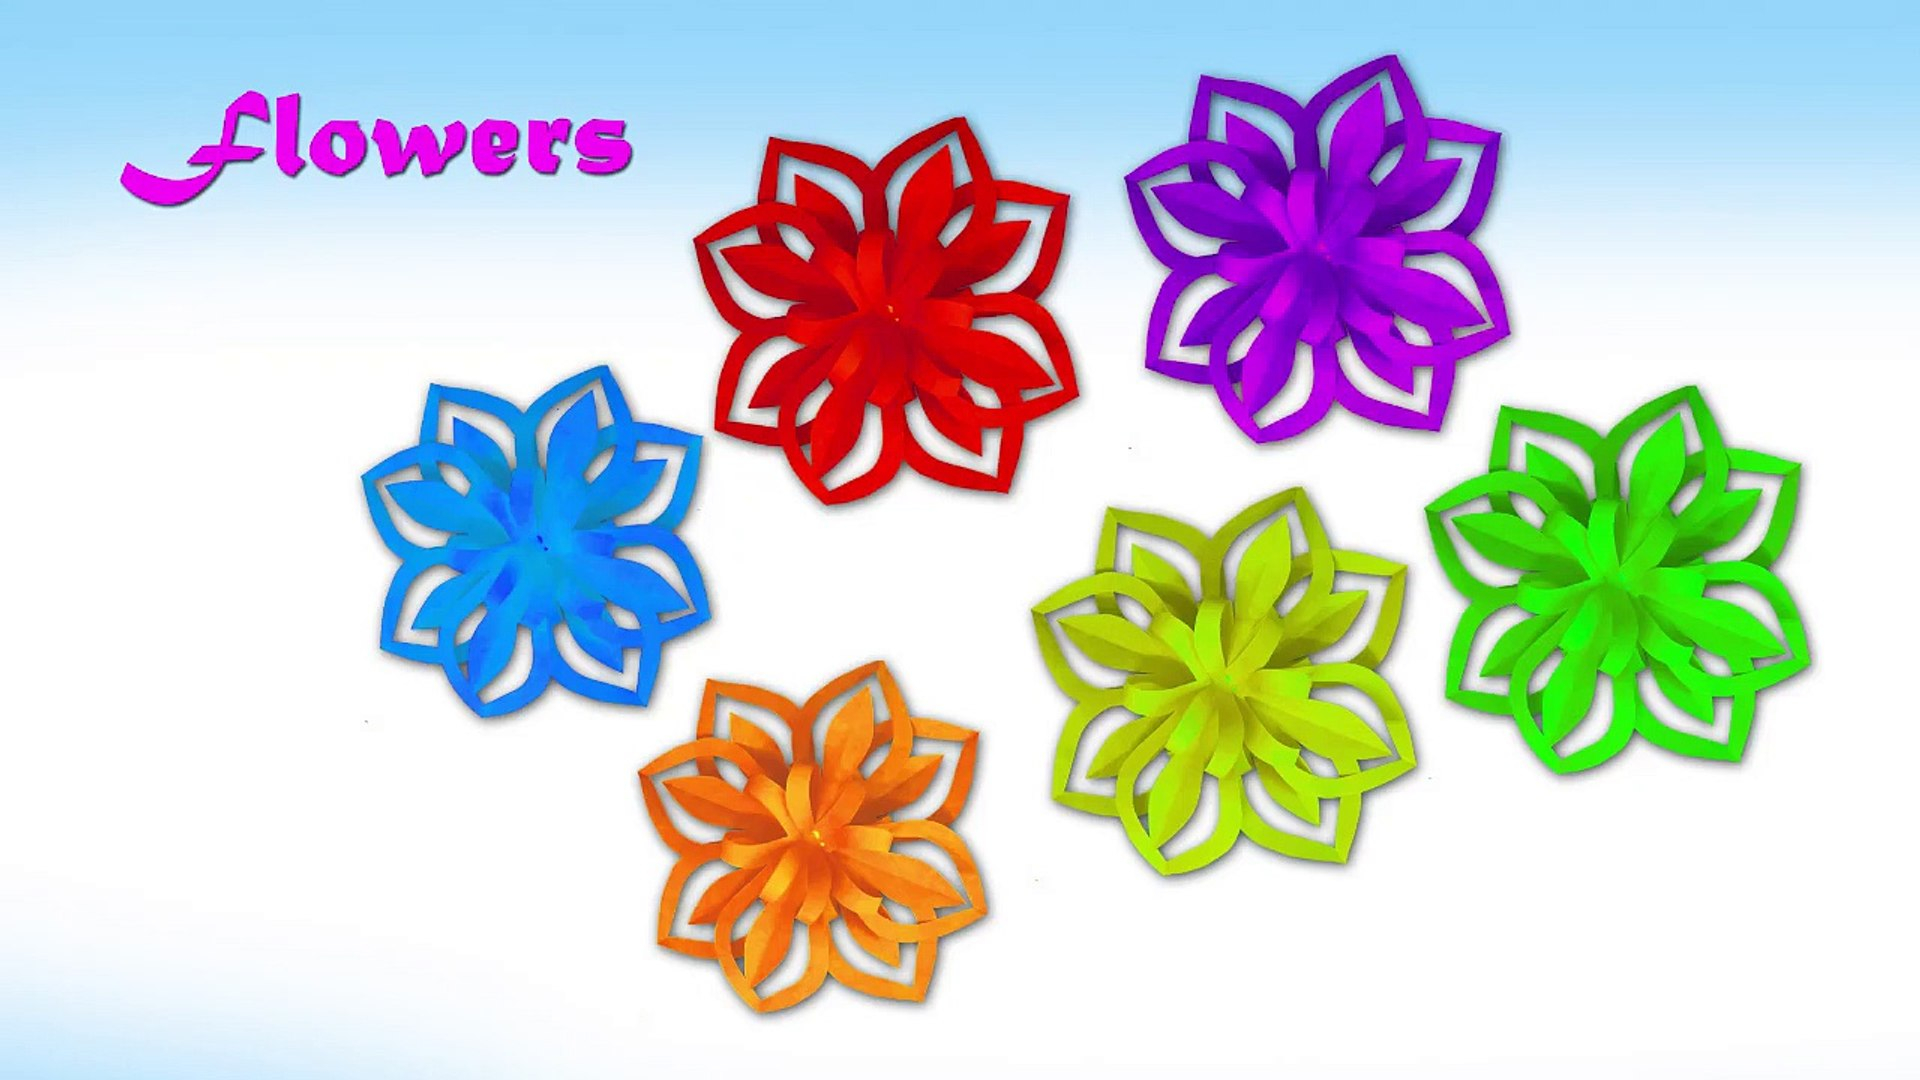 Origami Flowers Easy Origami Flowers How To Make Origami Flowers Very Easy Origami For All 9sarr7